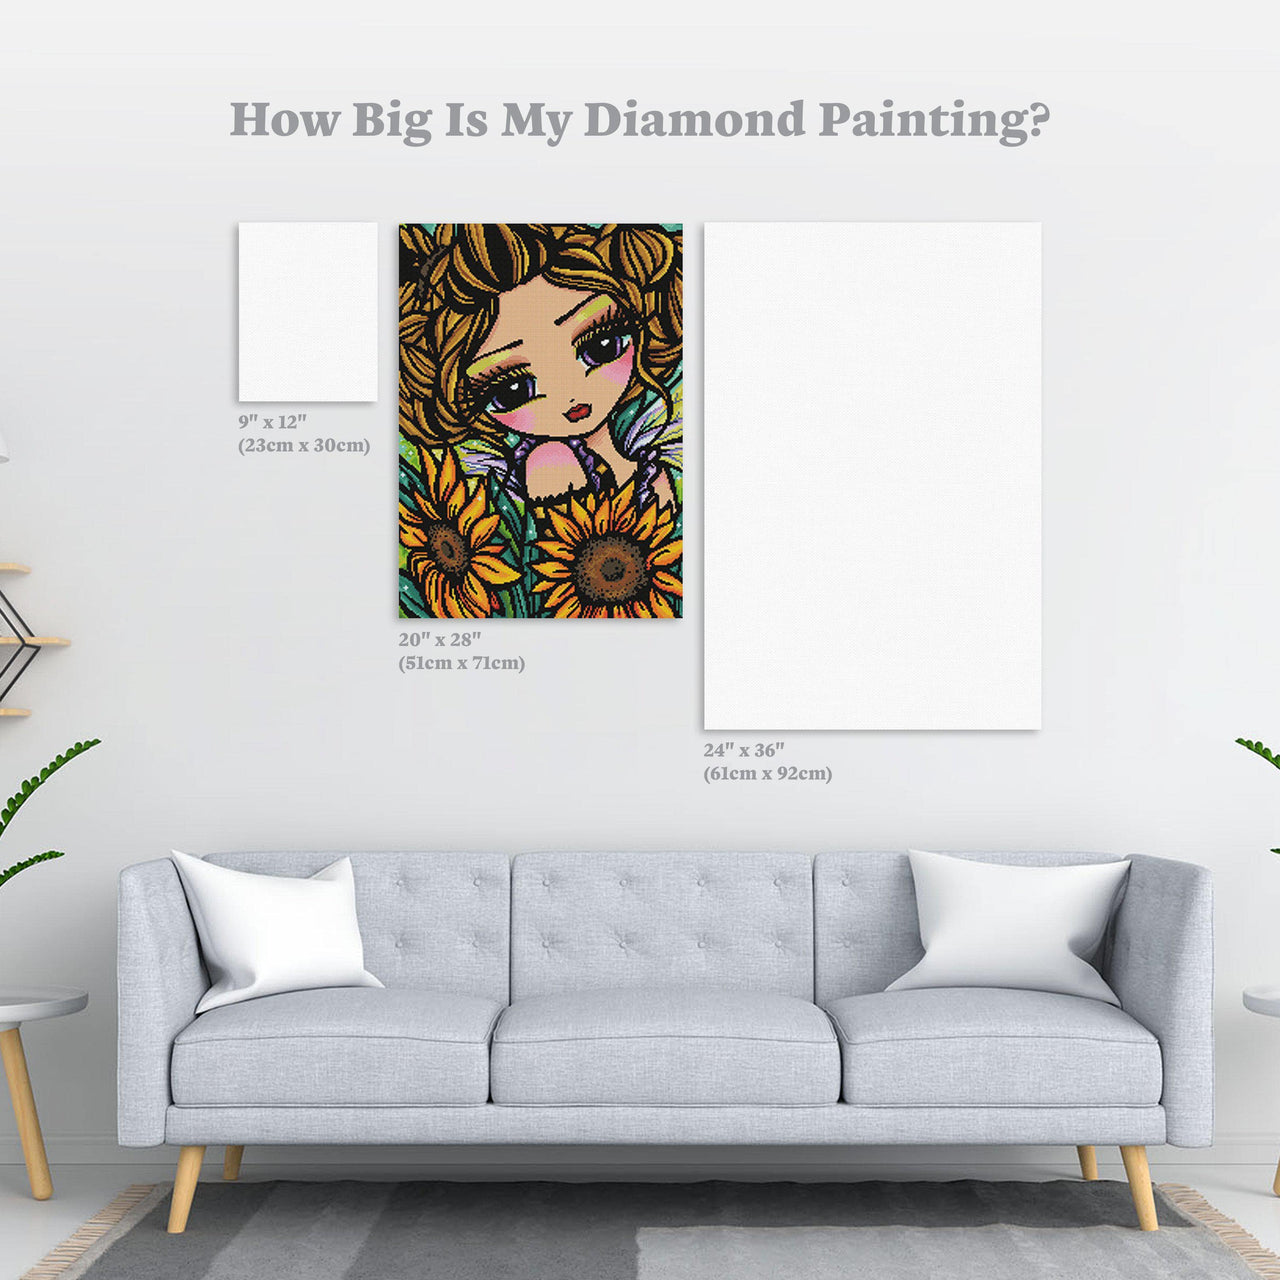 Diamond Painting DeeDee 20" x 28″ (51cm x 71cm) / Round with 47 Colors including 5 ABs / 45,612